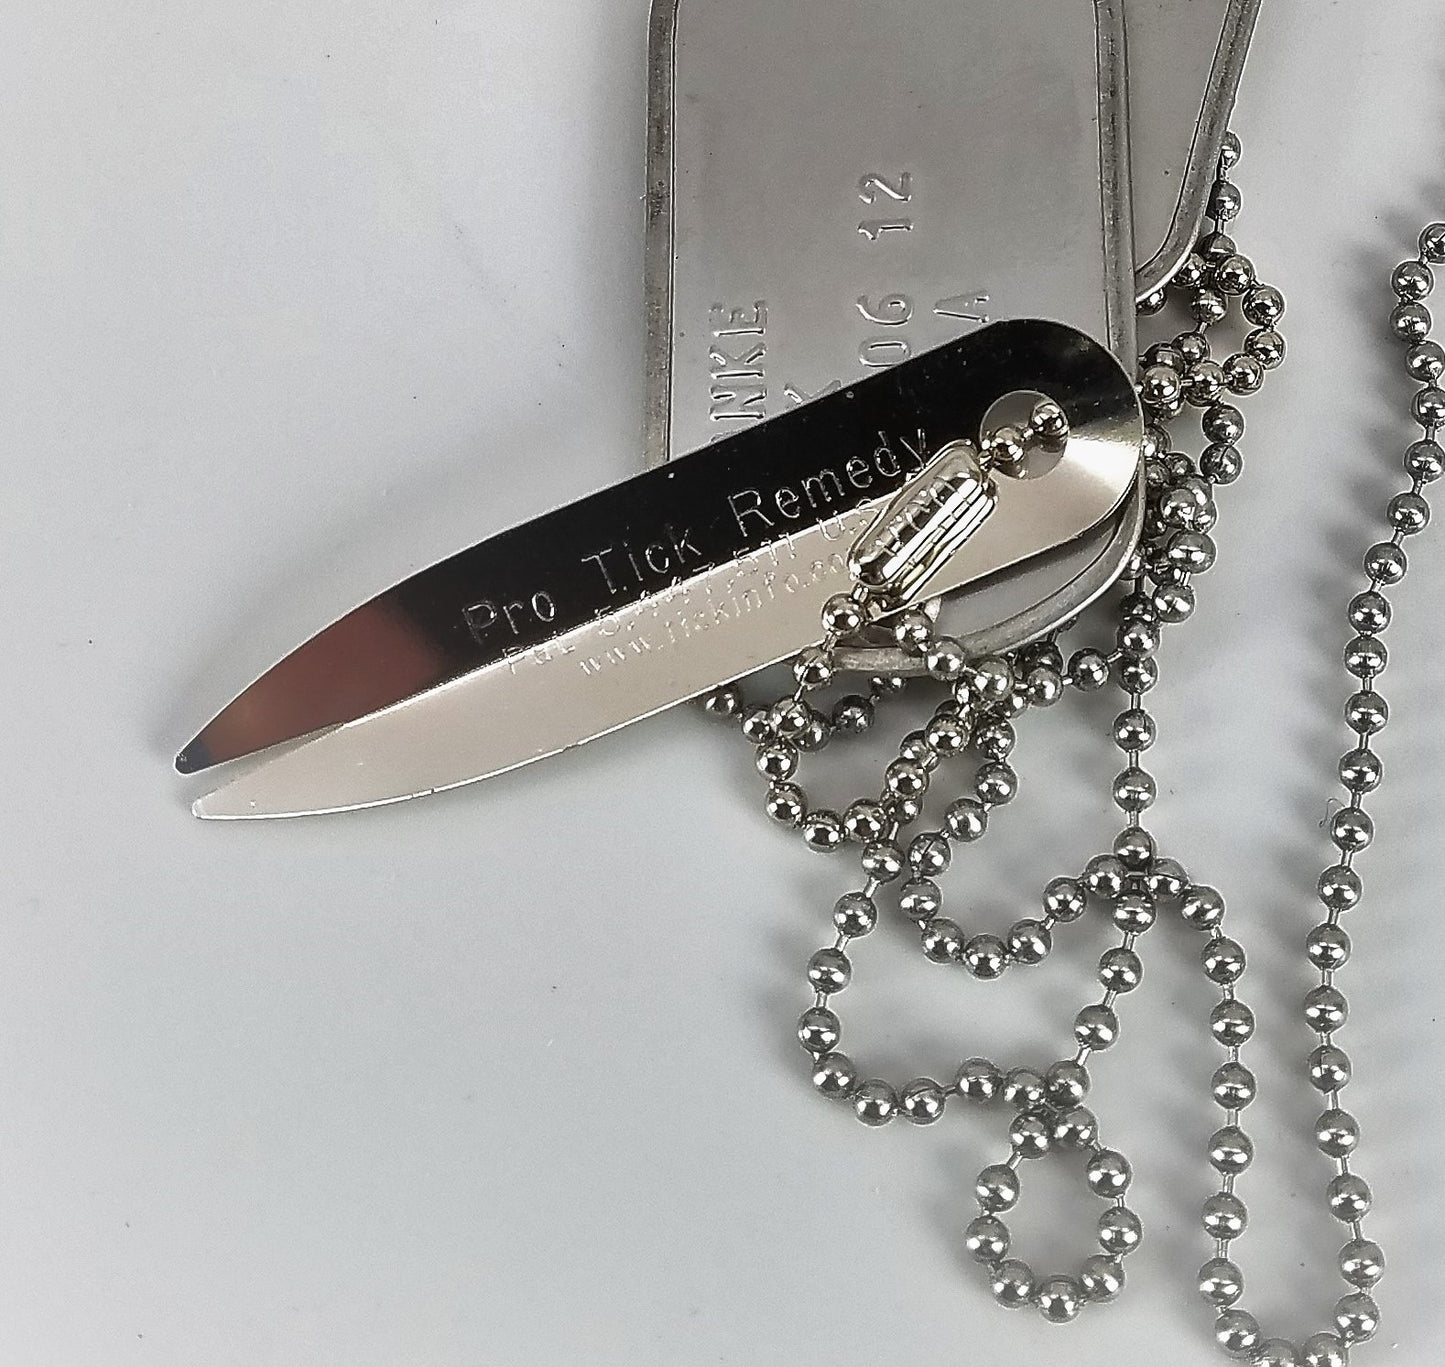 Protick on a dog tag chain